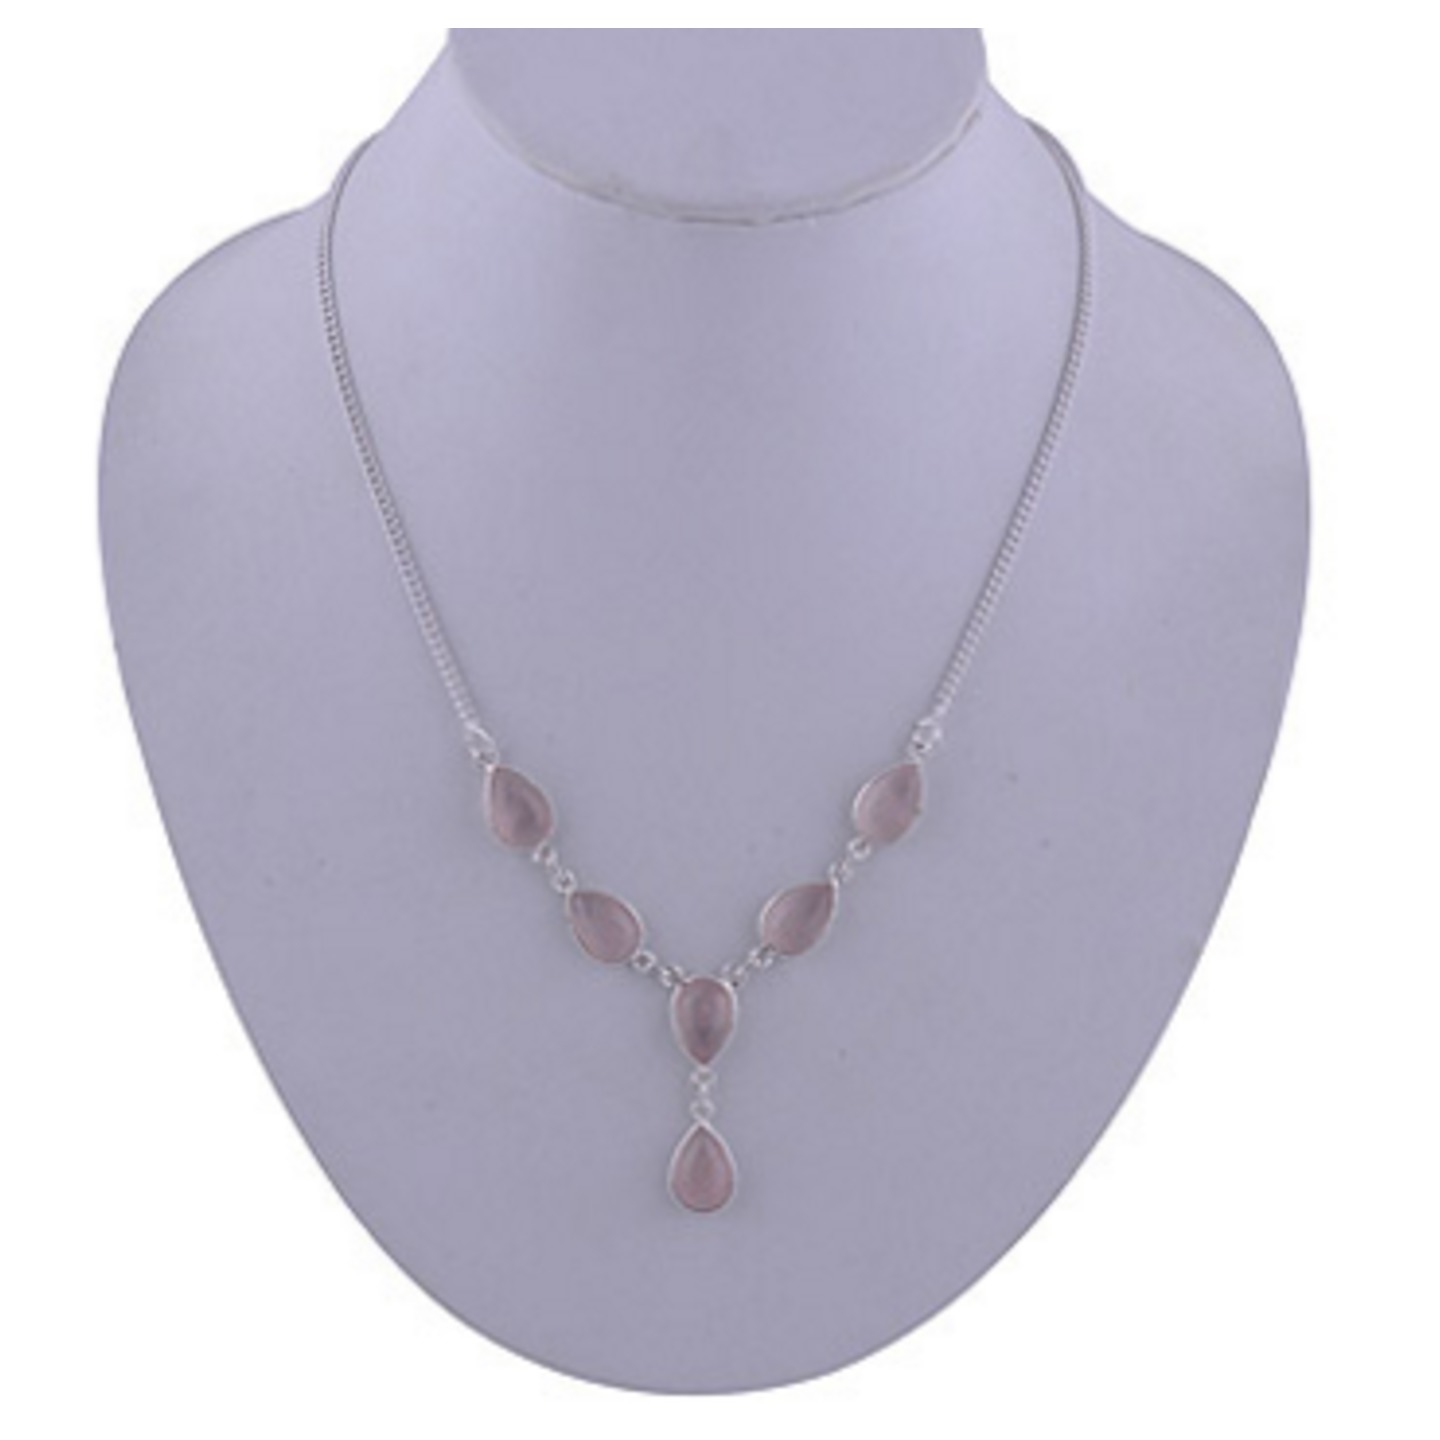 The Rose Silver Necklace